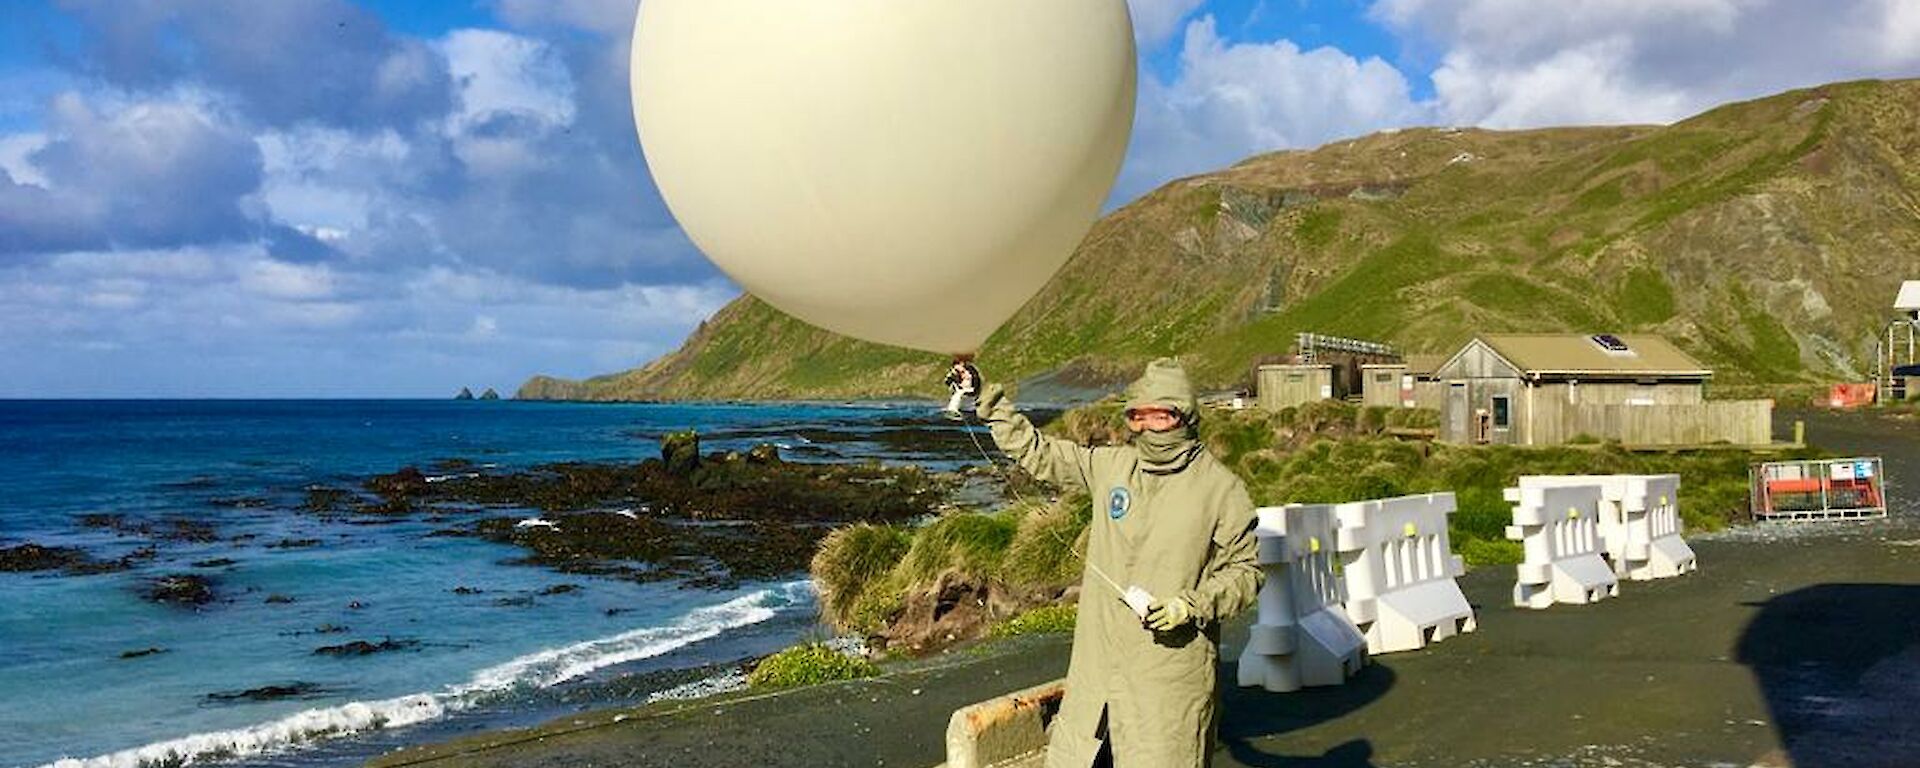 Rachel releases a balloon with a sonde attached to measure the atmospheric conditions.